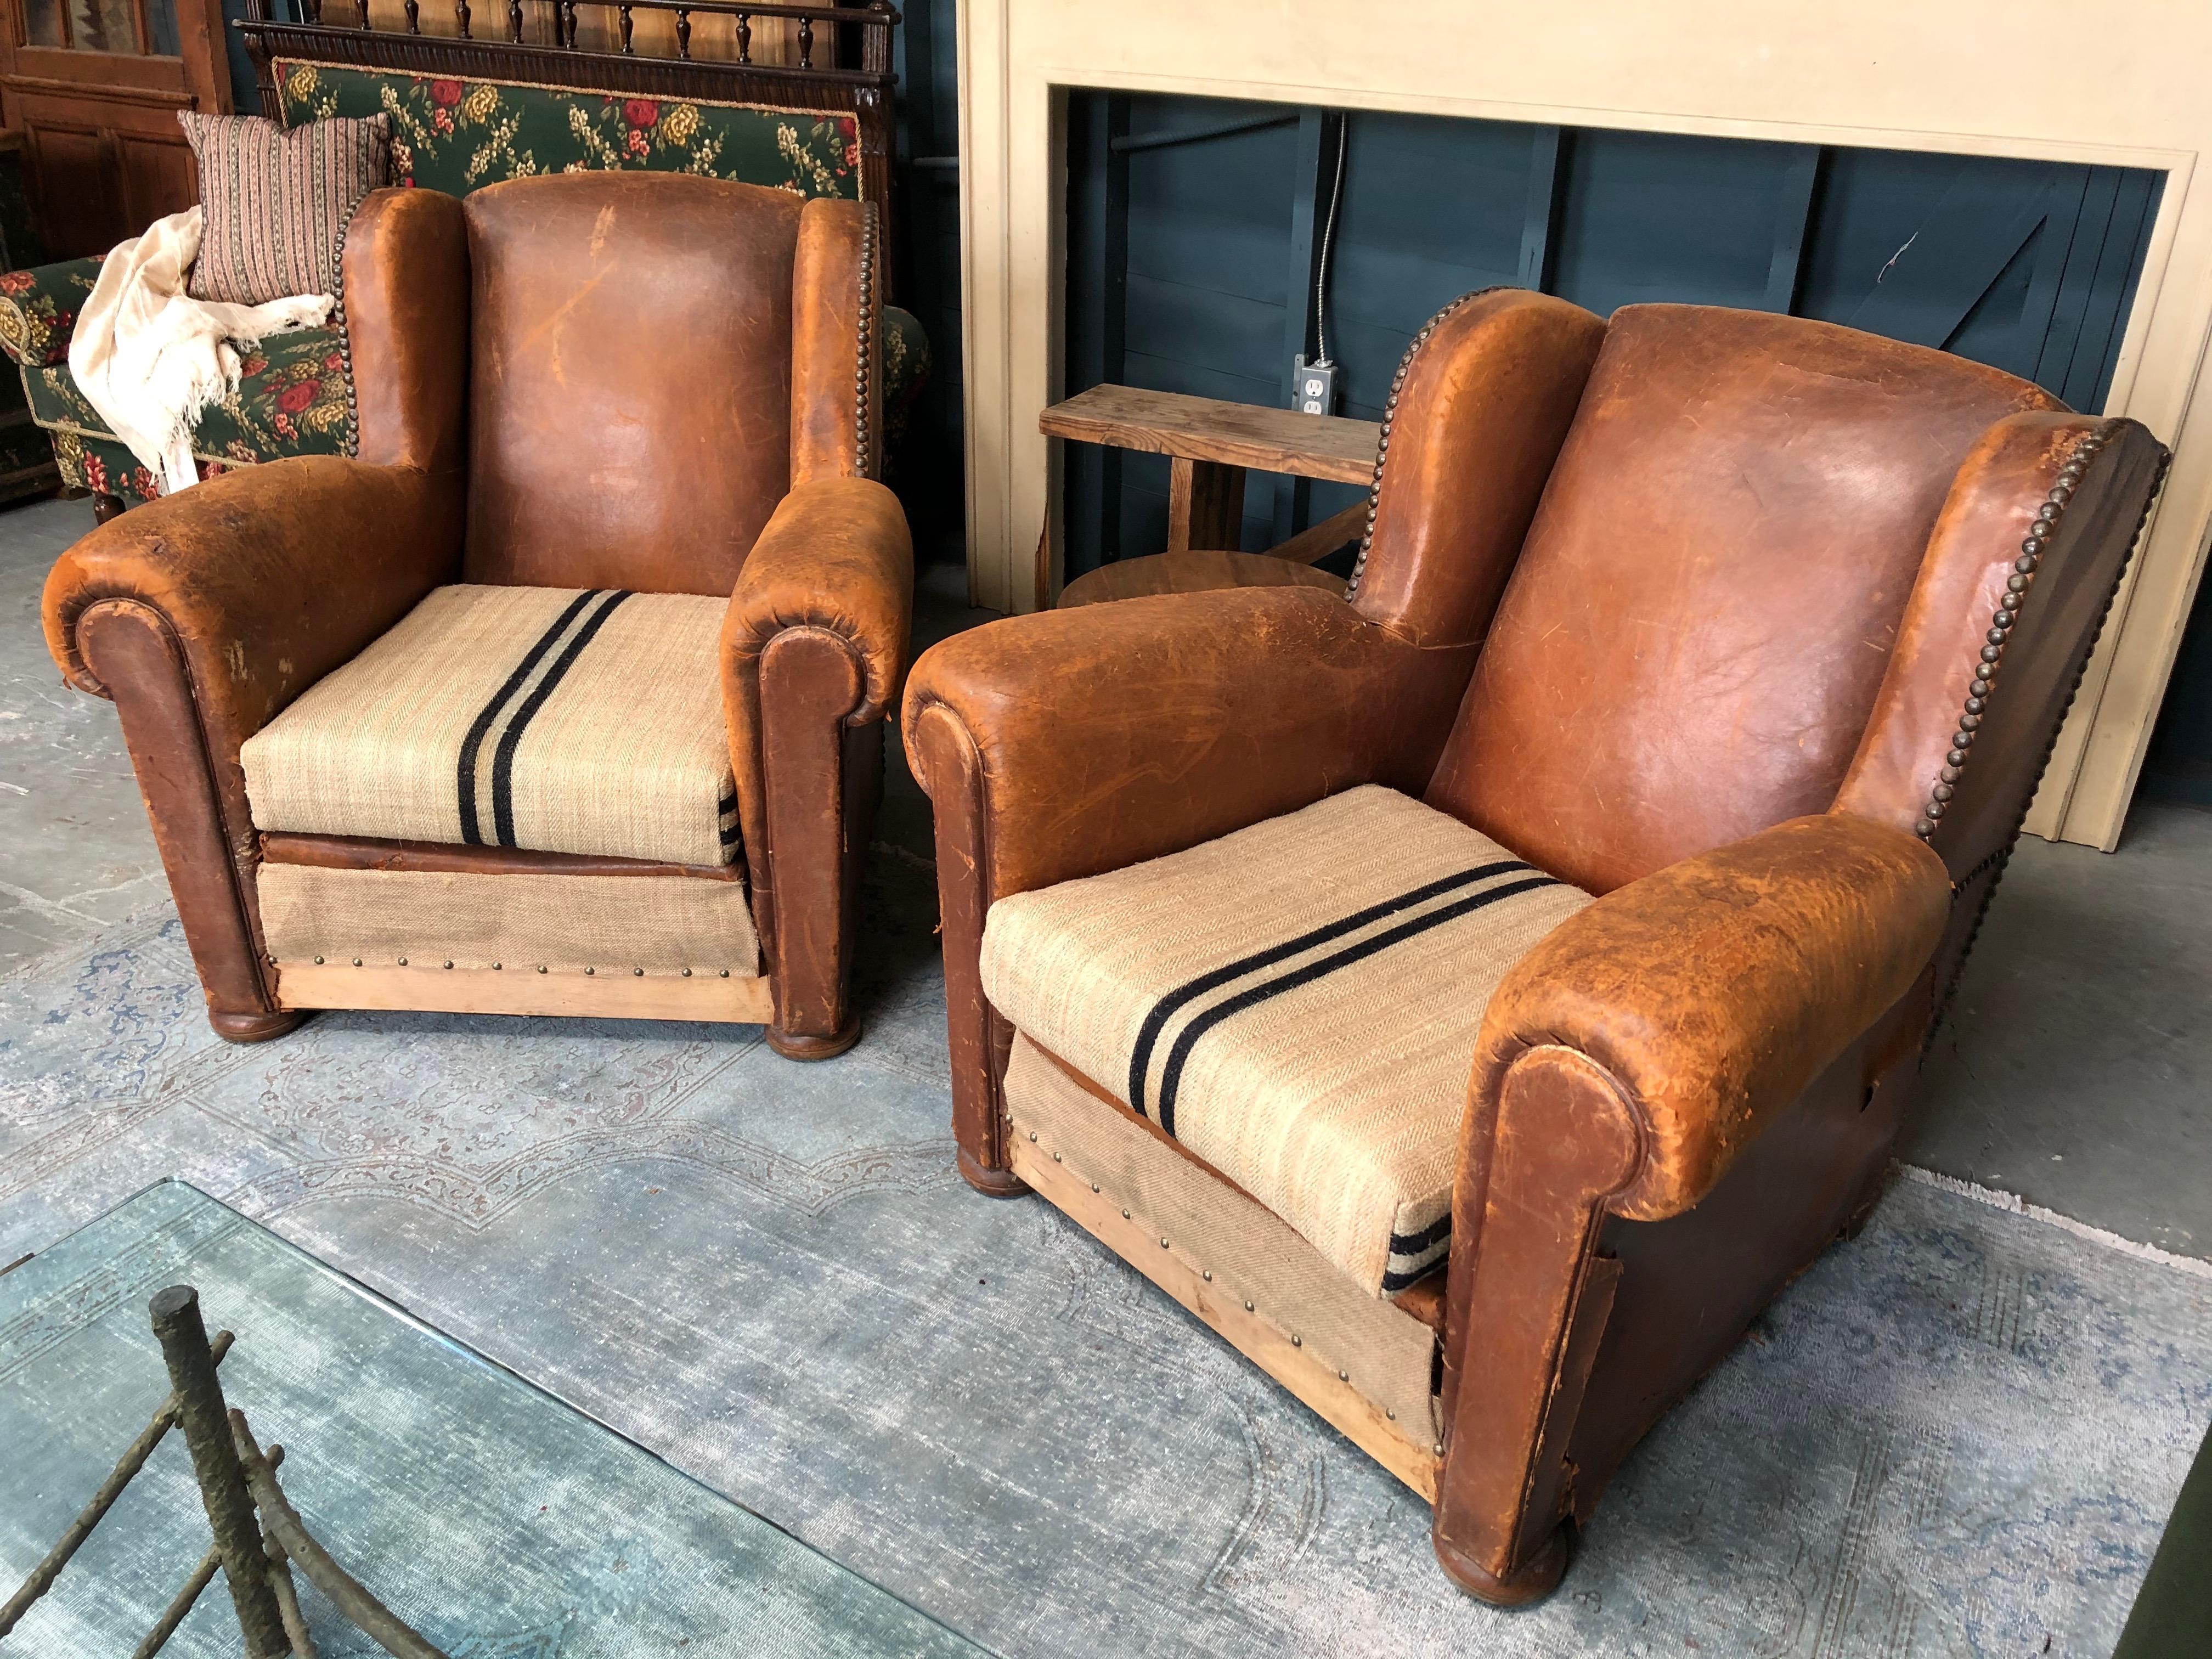 Timeless 1930's club chairs that have been partially reupholstered with vintage French grain sack fabric. They are in great vintage condition.

Measures: 35 W x 32 D x 35.5 H

1 pair in stock

Sold as a pair.